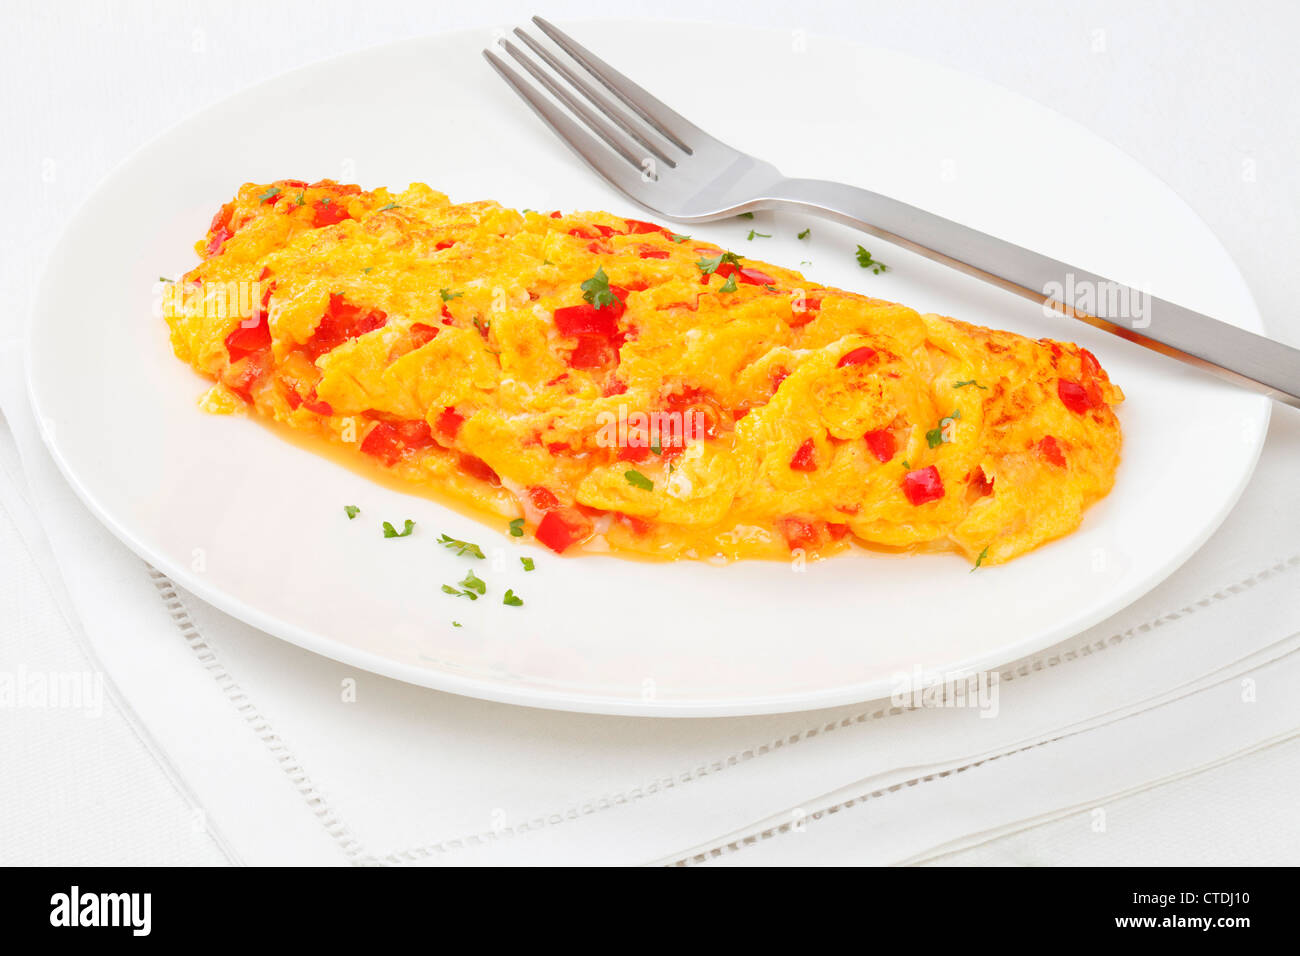 Tasty French omelette with cheese and red capsicum. Stock Photo